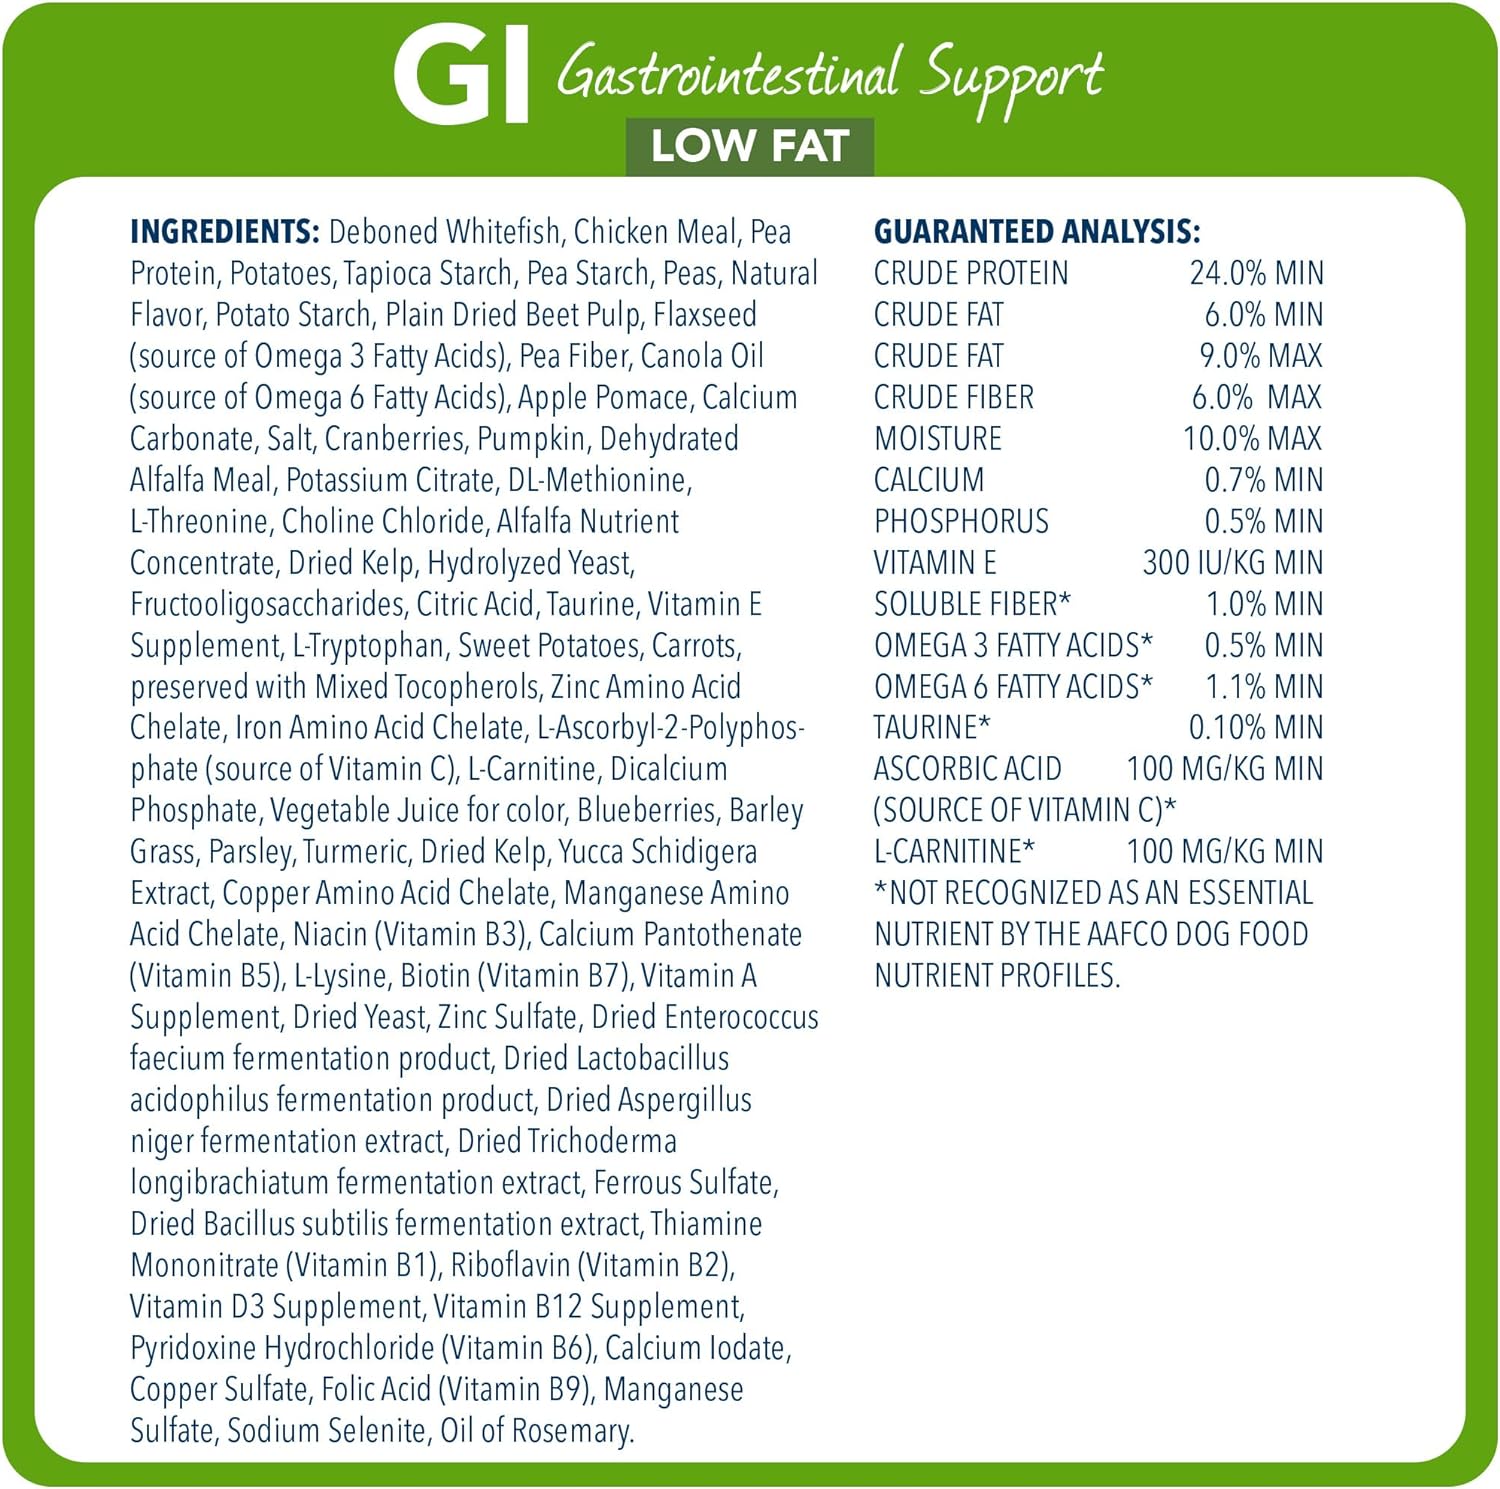 Blue Natural Veterinary Diet GI Gastrointestinal Support Low Fat Dry Dog Food – Gallery Image 2